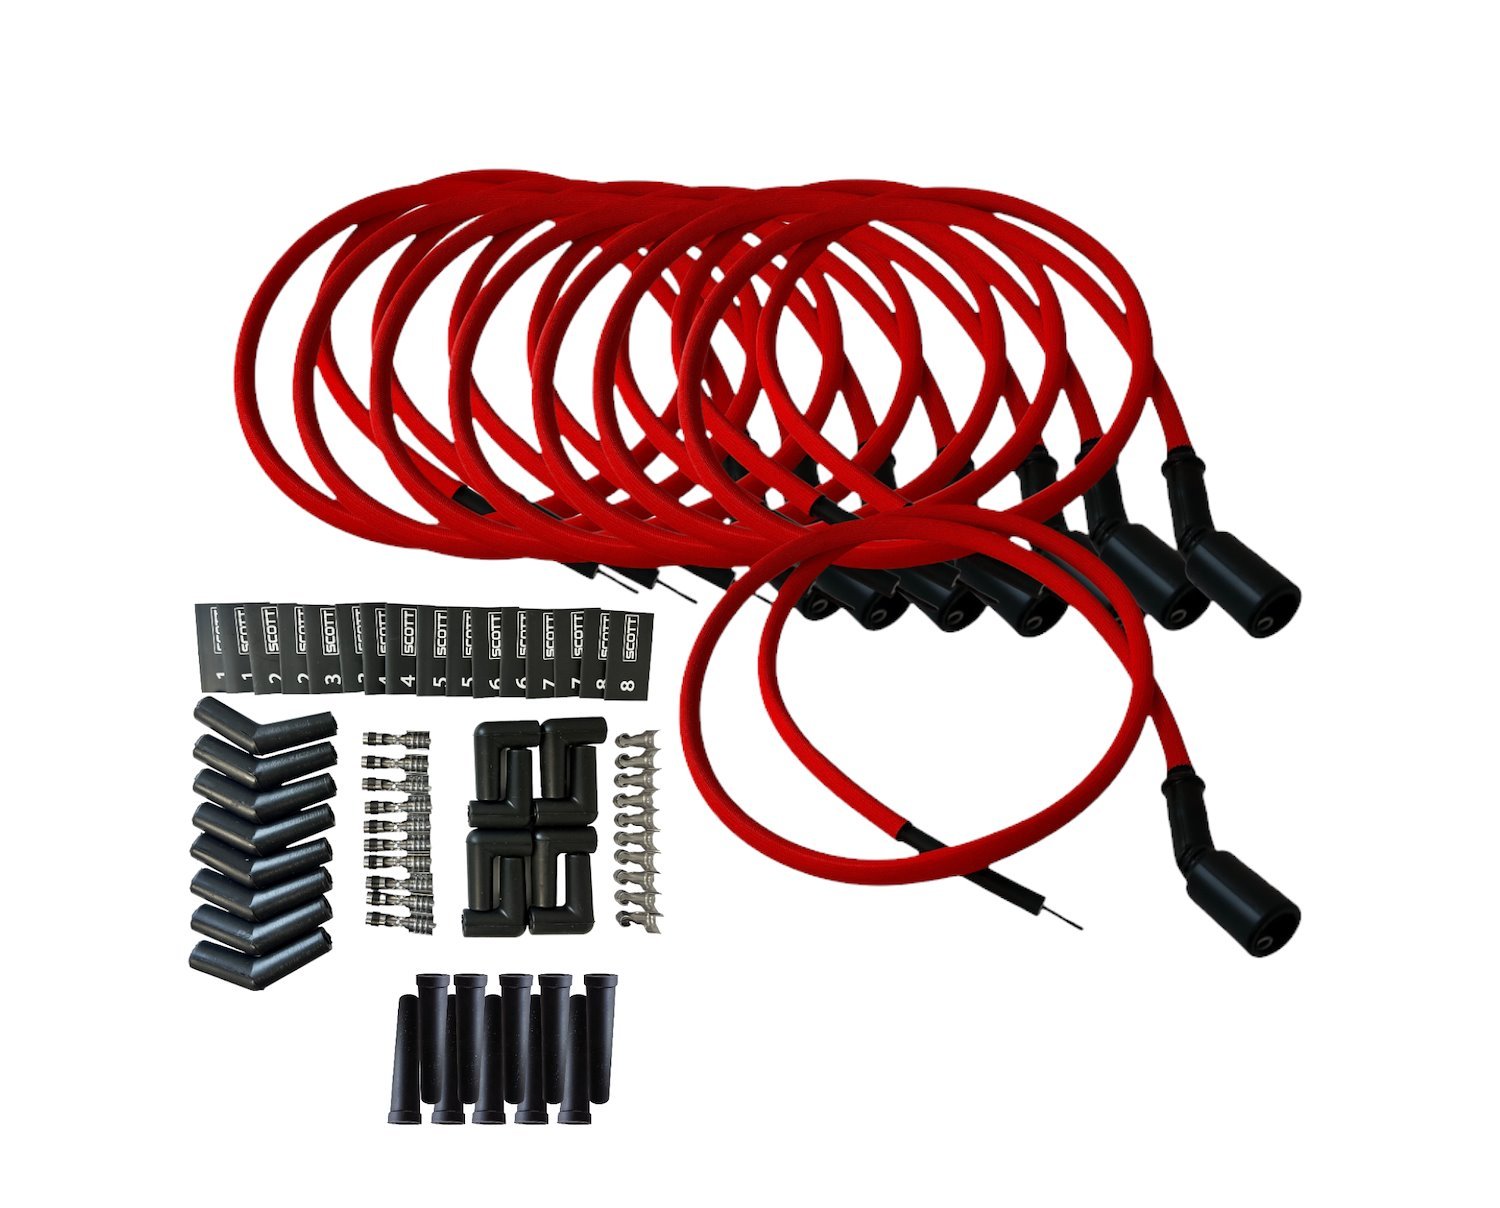 SPW-PS-LSRELO-2 DIY High-Performance Fiberglass-Oversleeved Spark Plug Wire Set for DIY Kits, GM LS [Red]